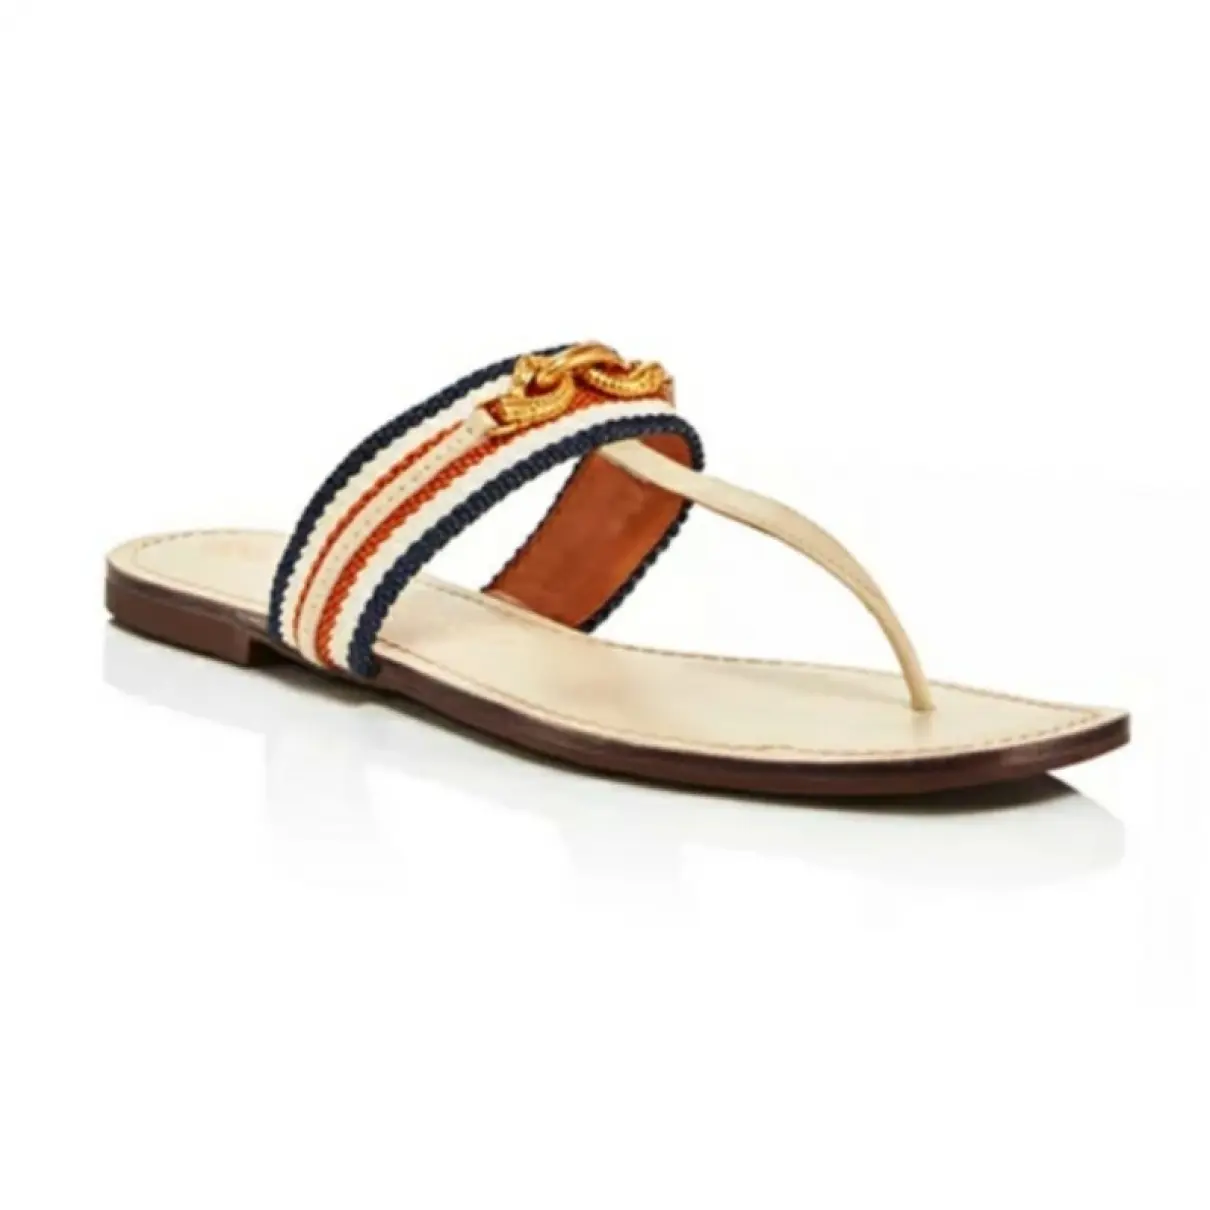 Leather sandals Tory Burch